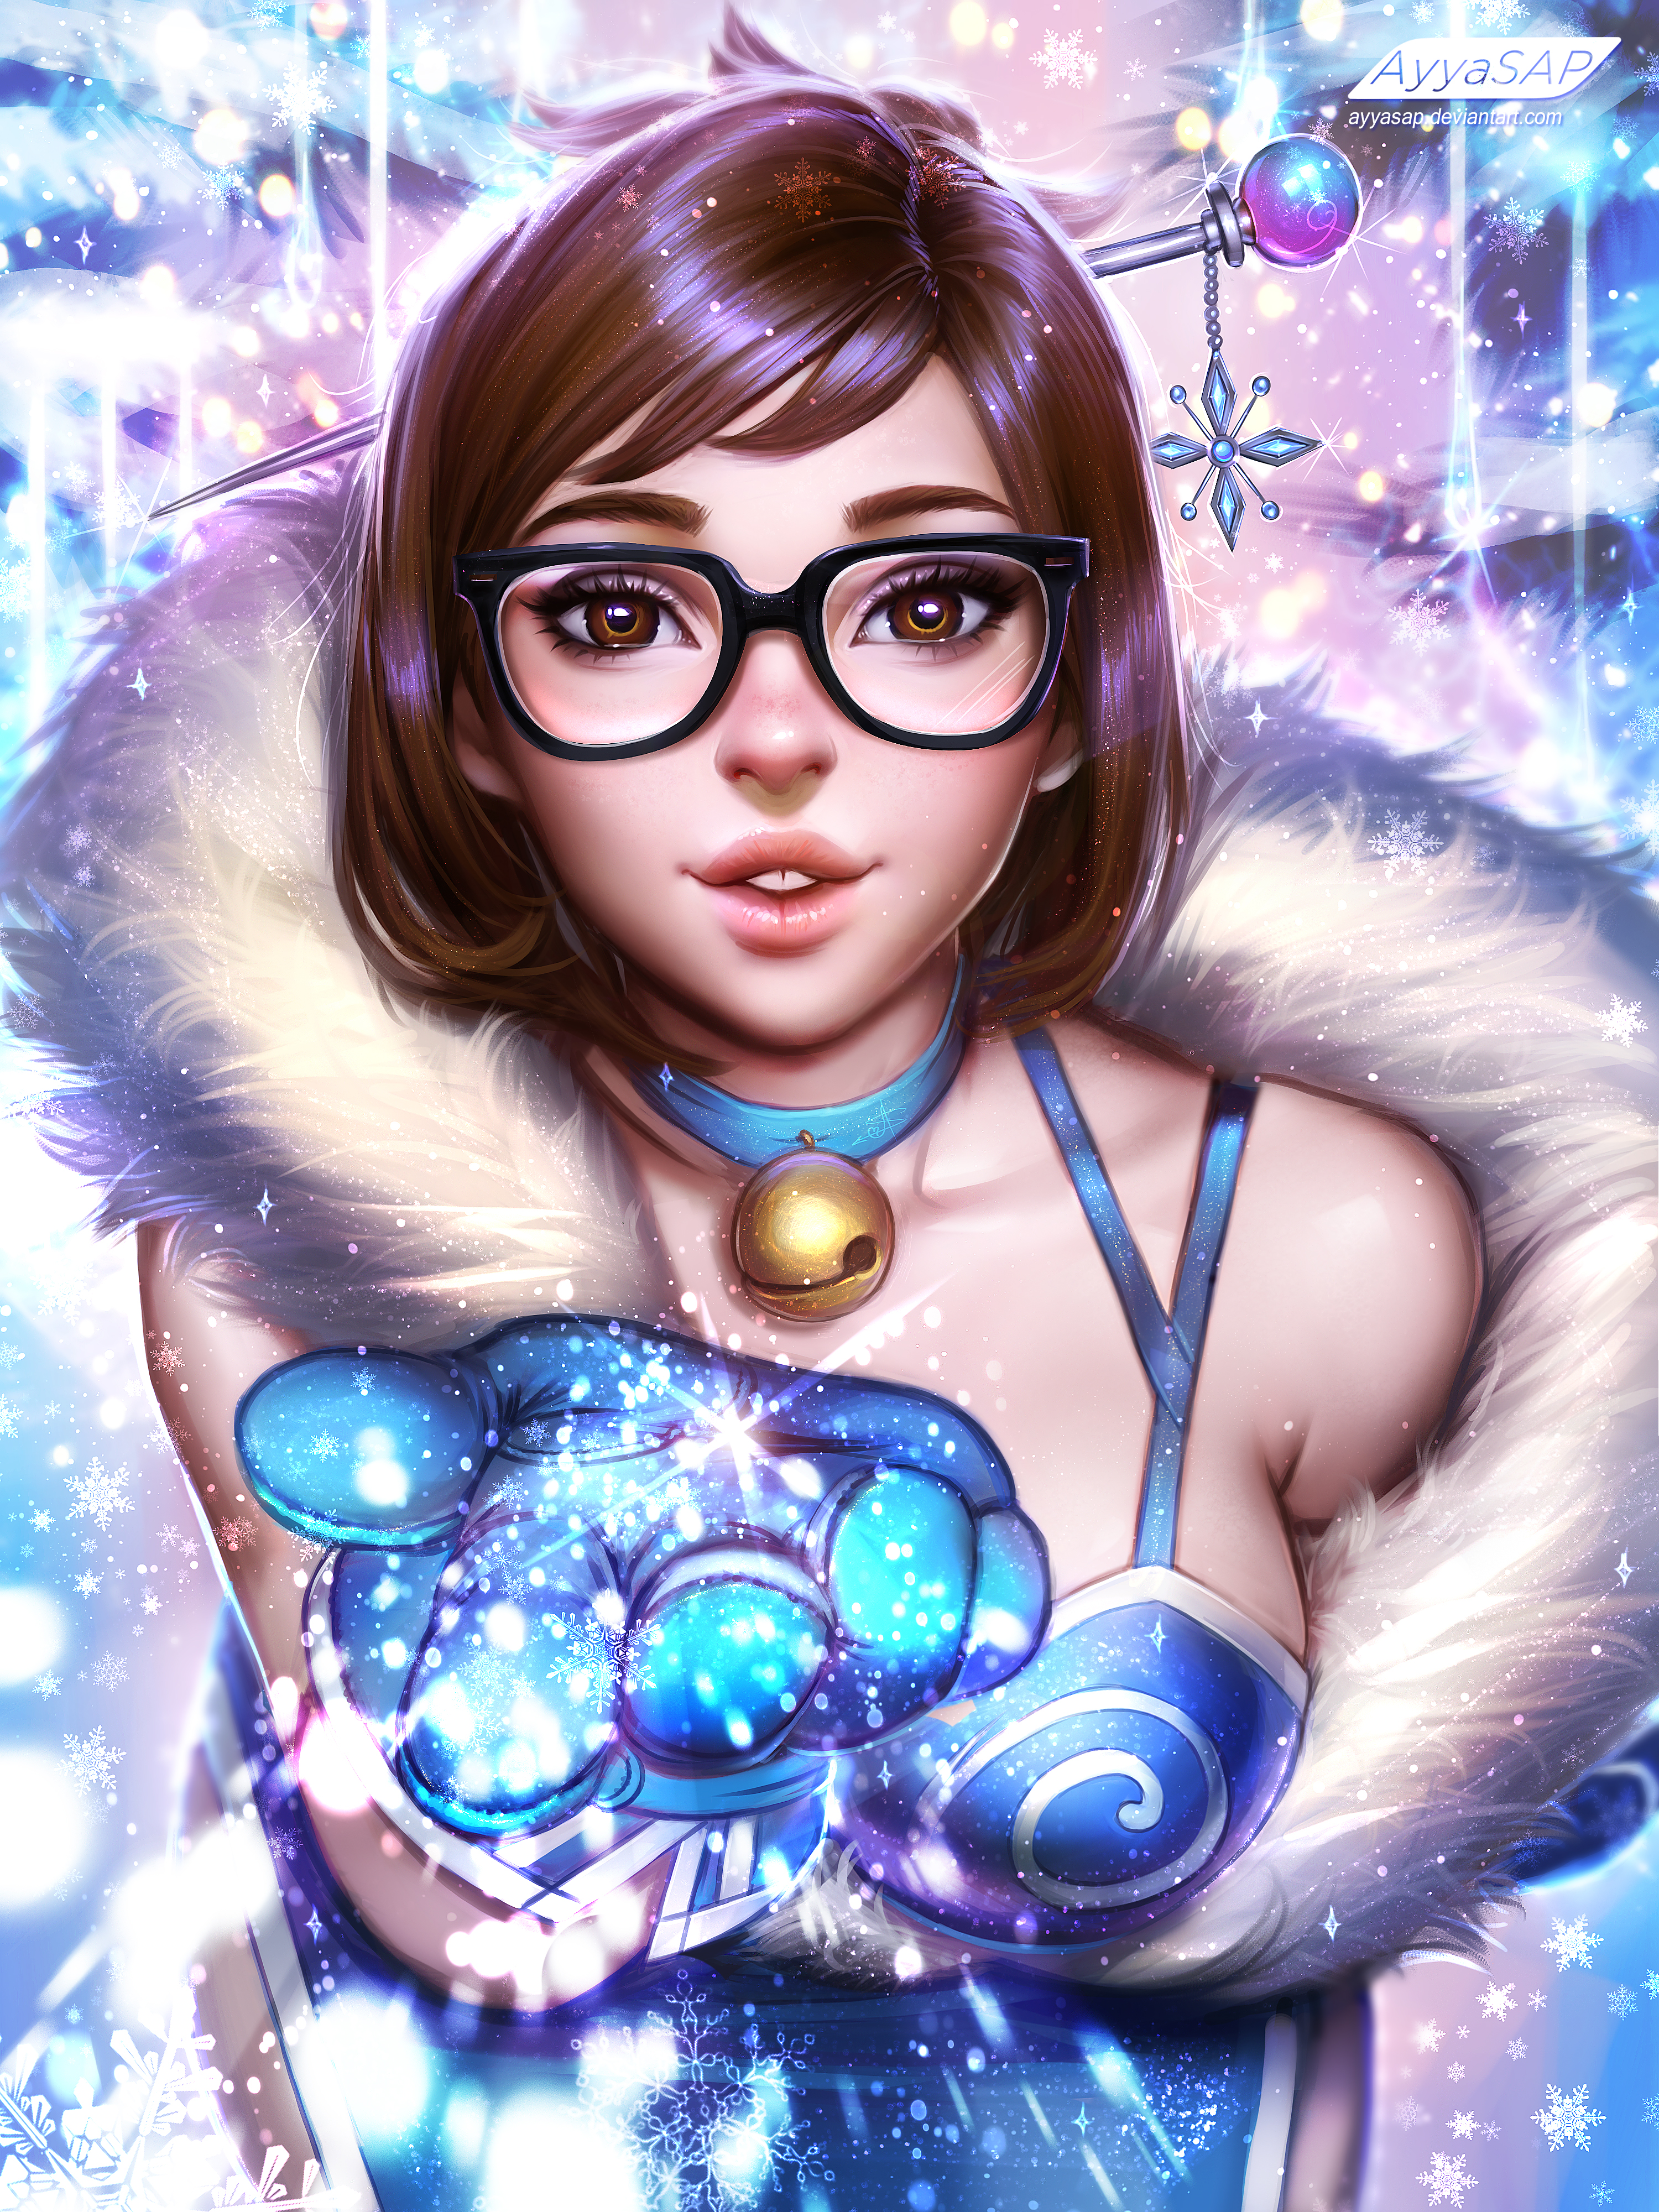 Mei Overwatch Overwatch Video Games Video Game Girls Brunette POV Women With Glasses Dress 2D Artwor 3000x4000